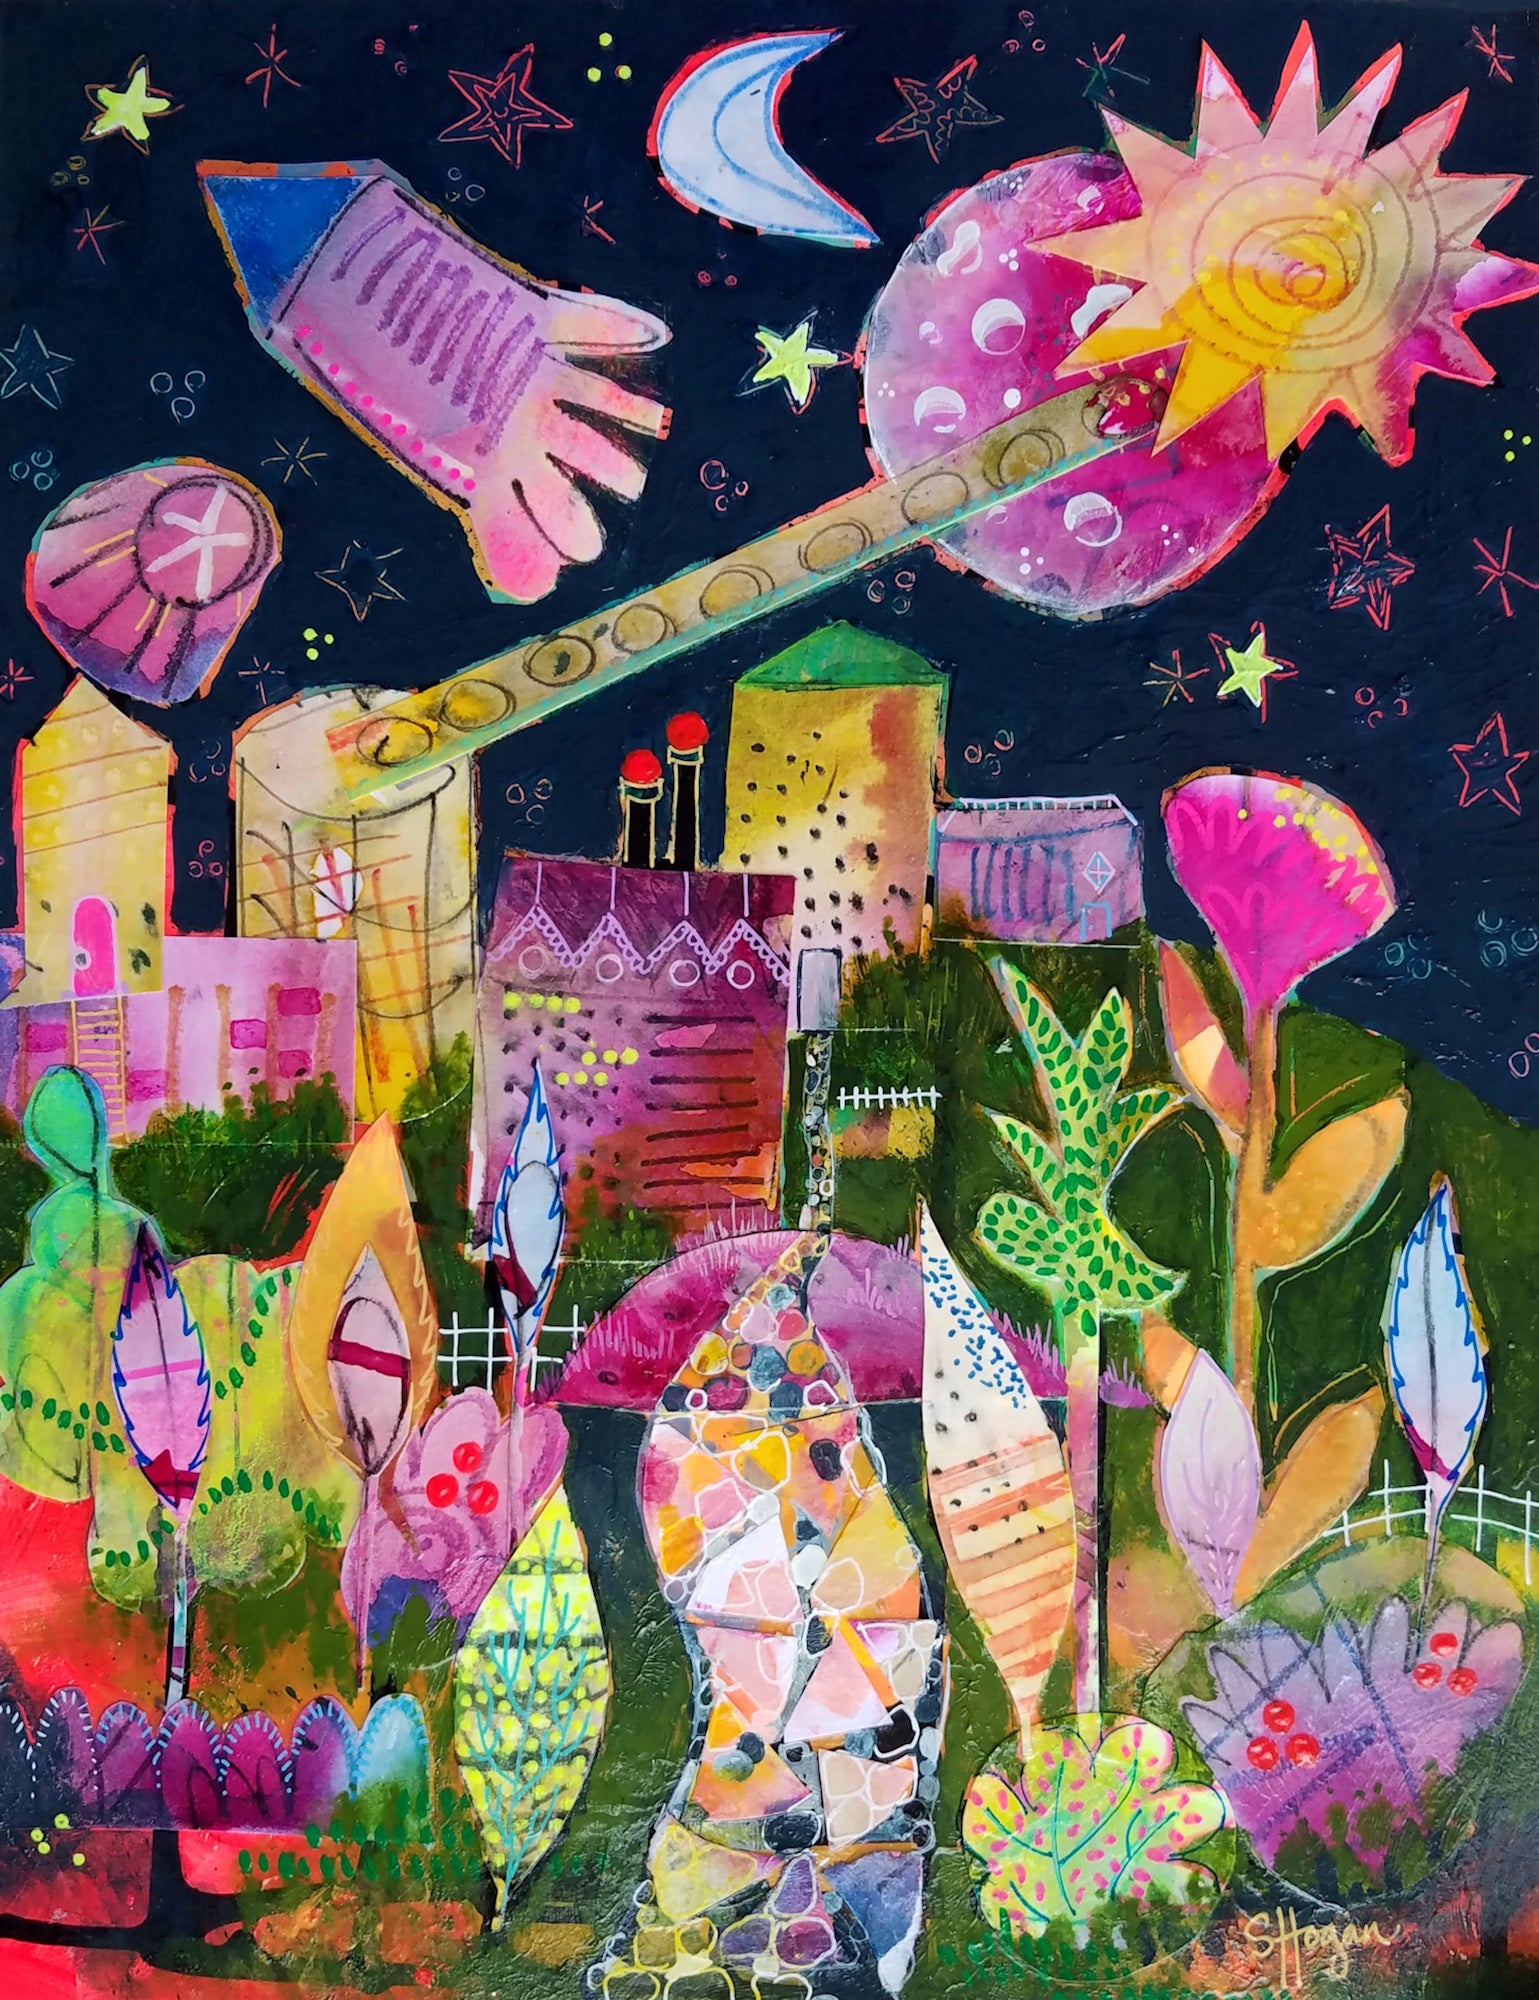 Garden City by Michigan artist Steph Joy Hogan. Numbered Limited Edition of 250  Size: 11x14" Media: Fine Art Giclee on Heavy Bond Paper